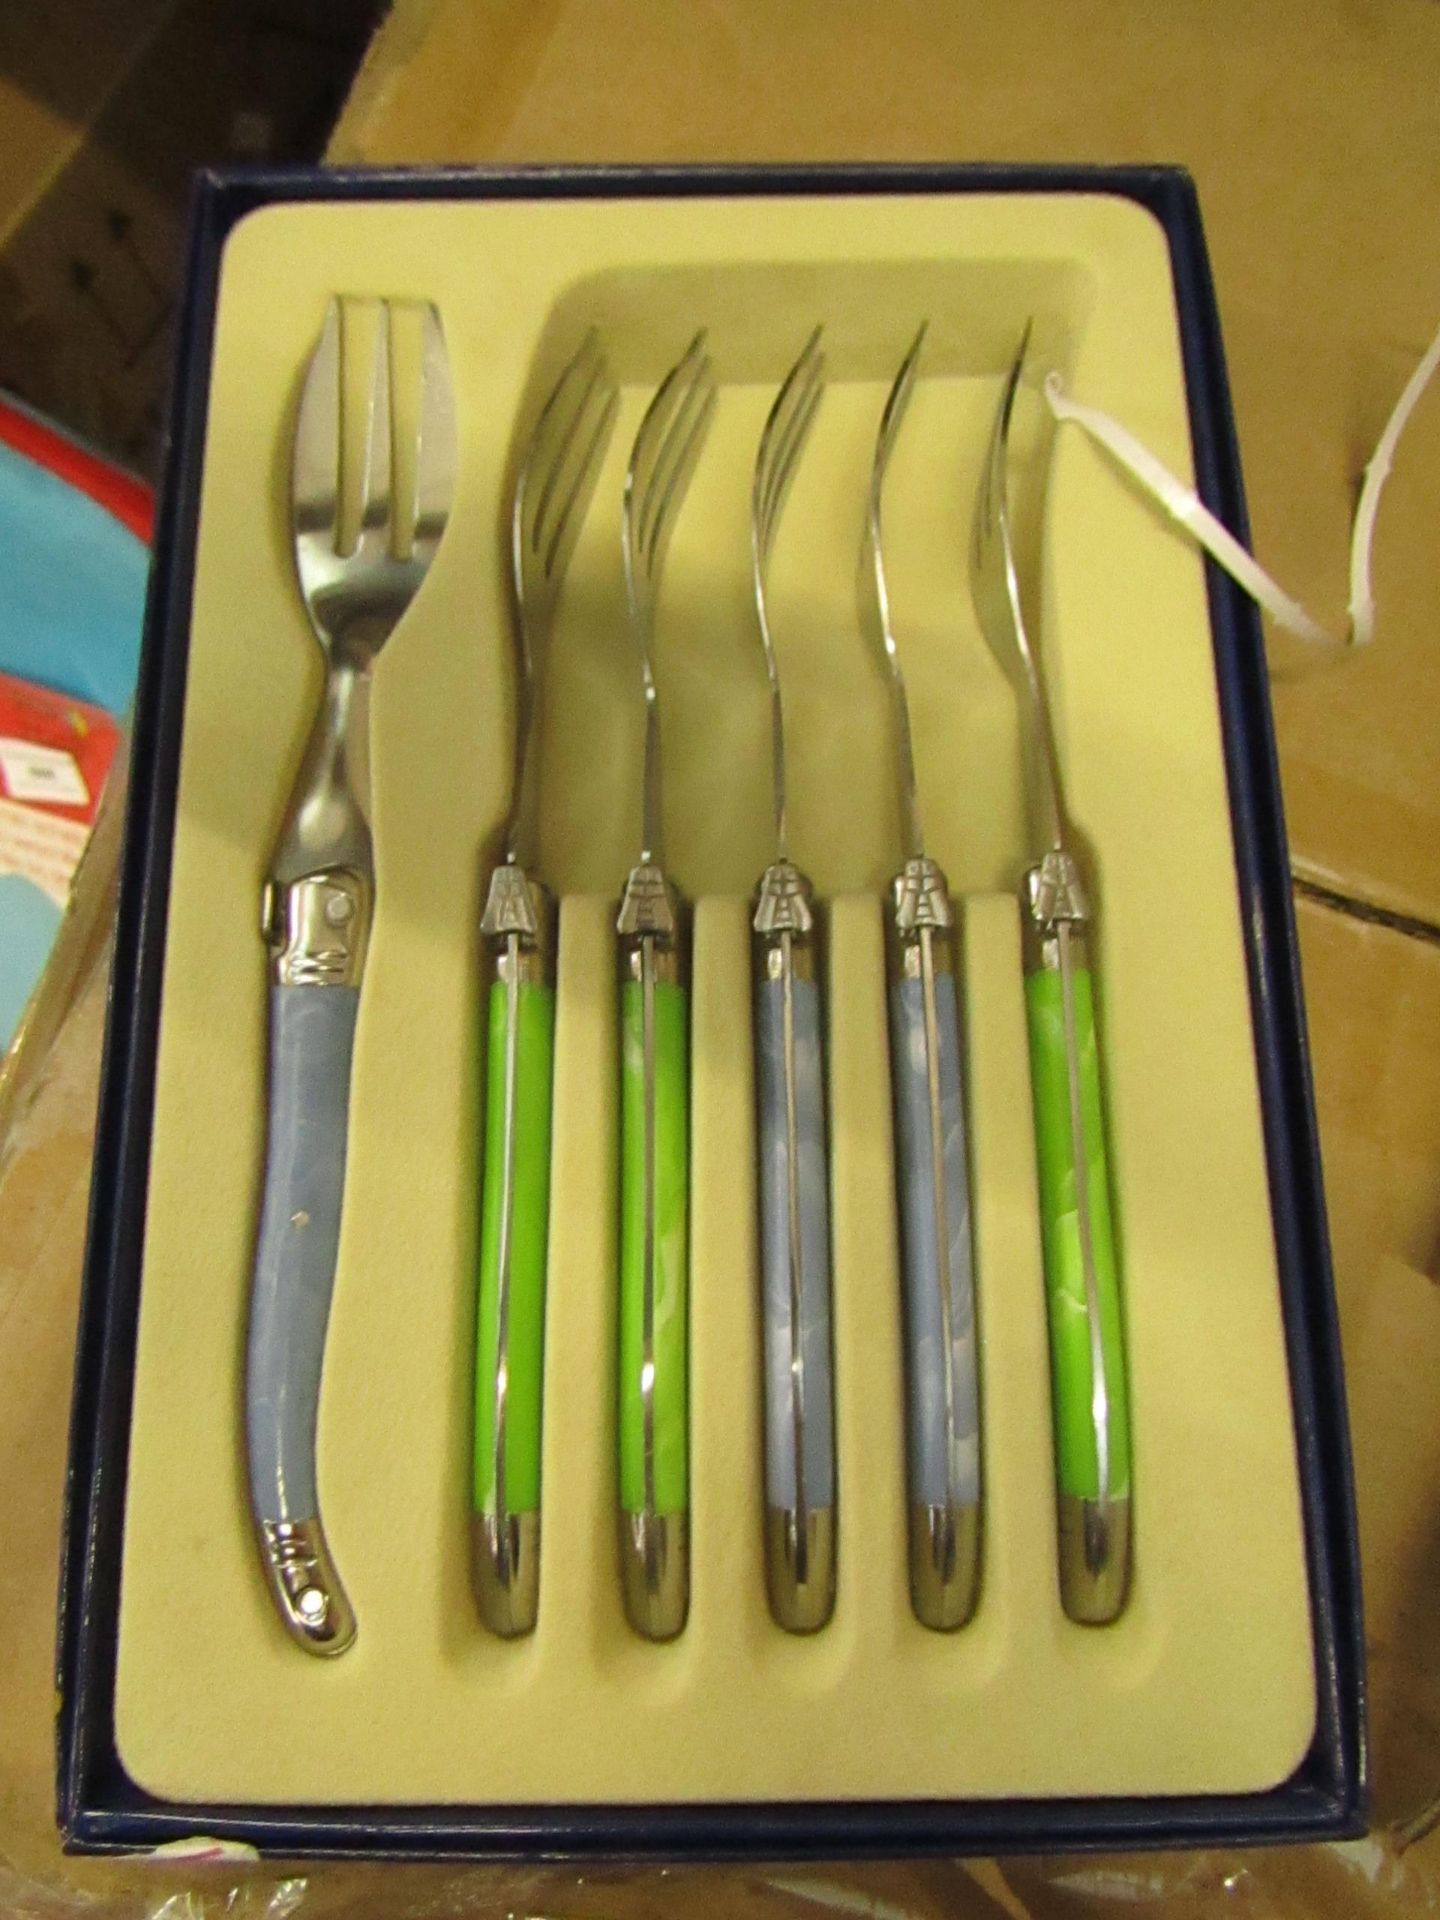 5x Laguiole - 5 Piece Cake Fork Set (Green & Blue) - New & Boxed.